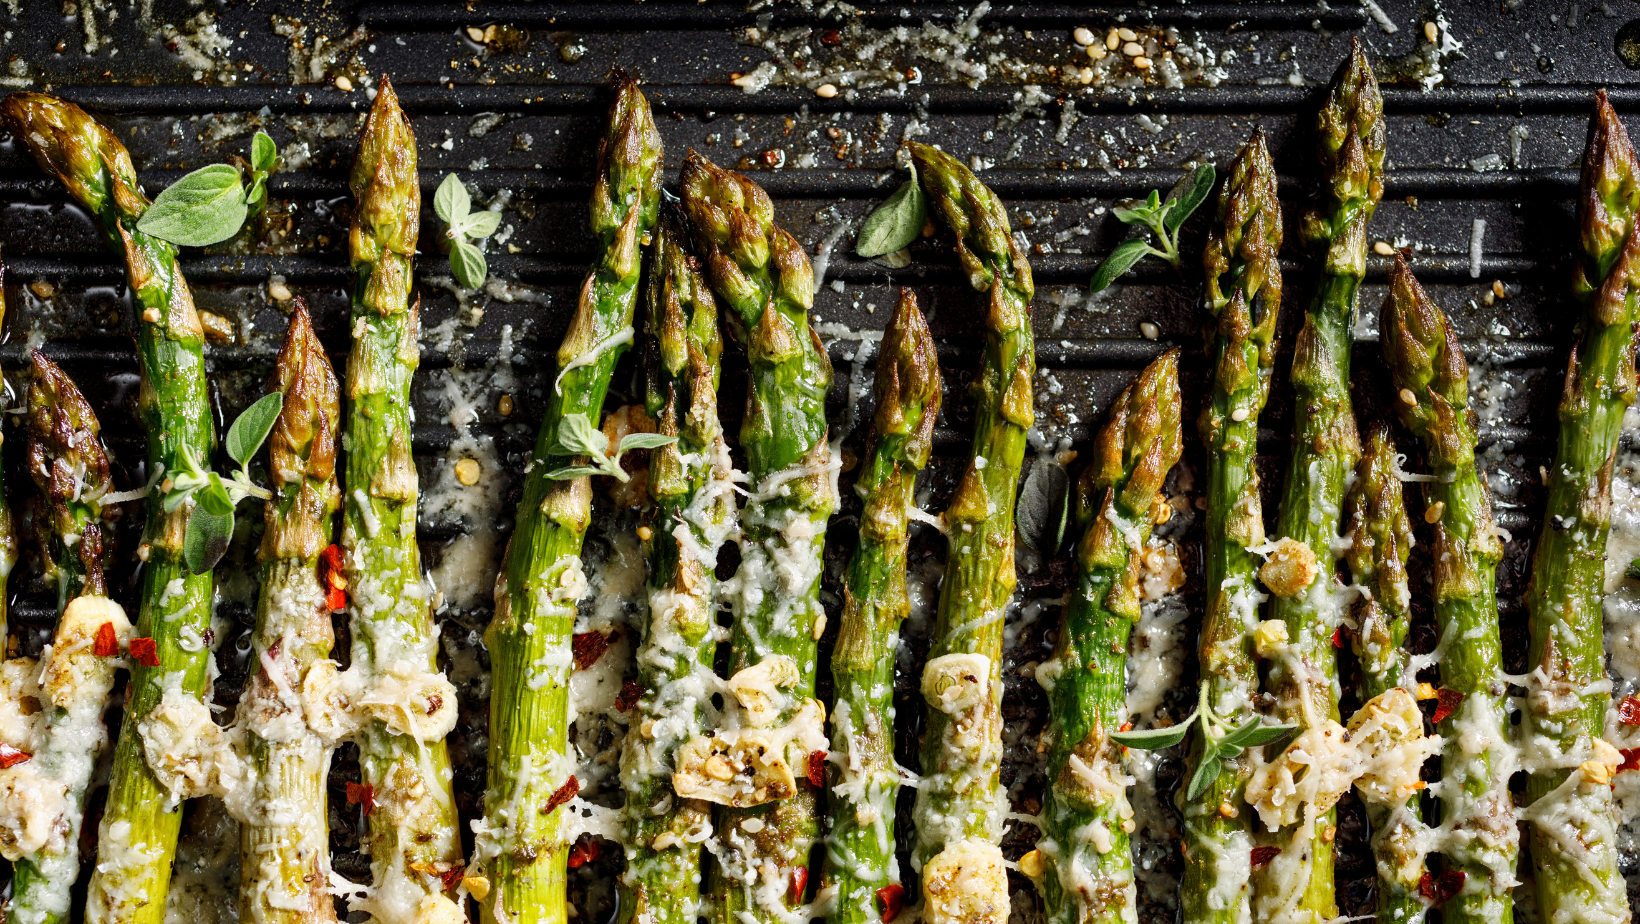 Grilled green asparagus with the addition of parmesan cheese, garlic and aromatic herbs on the grill plate, top view